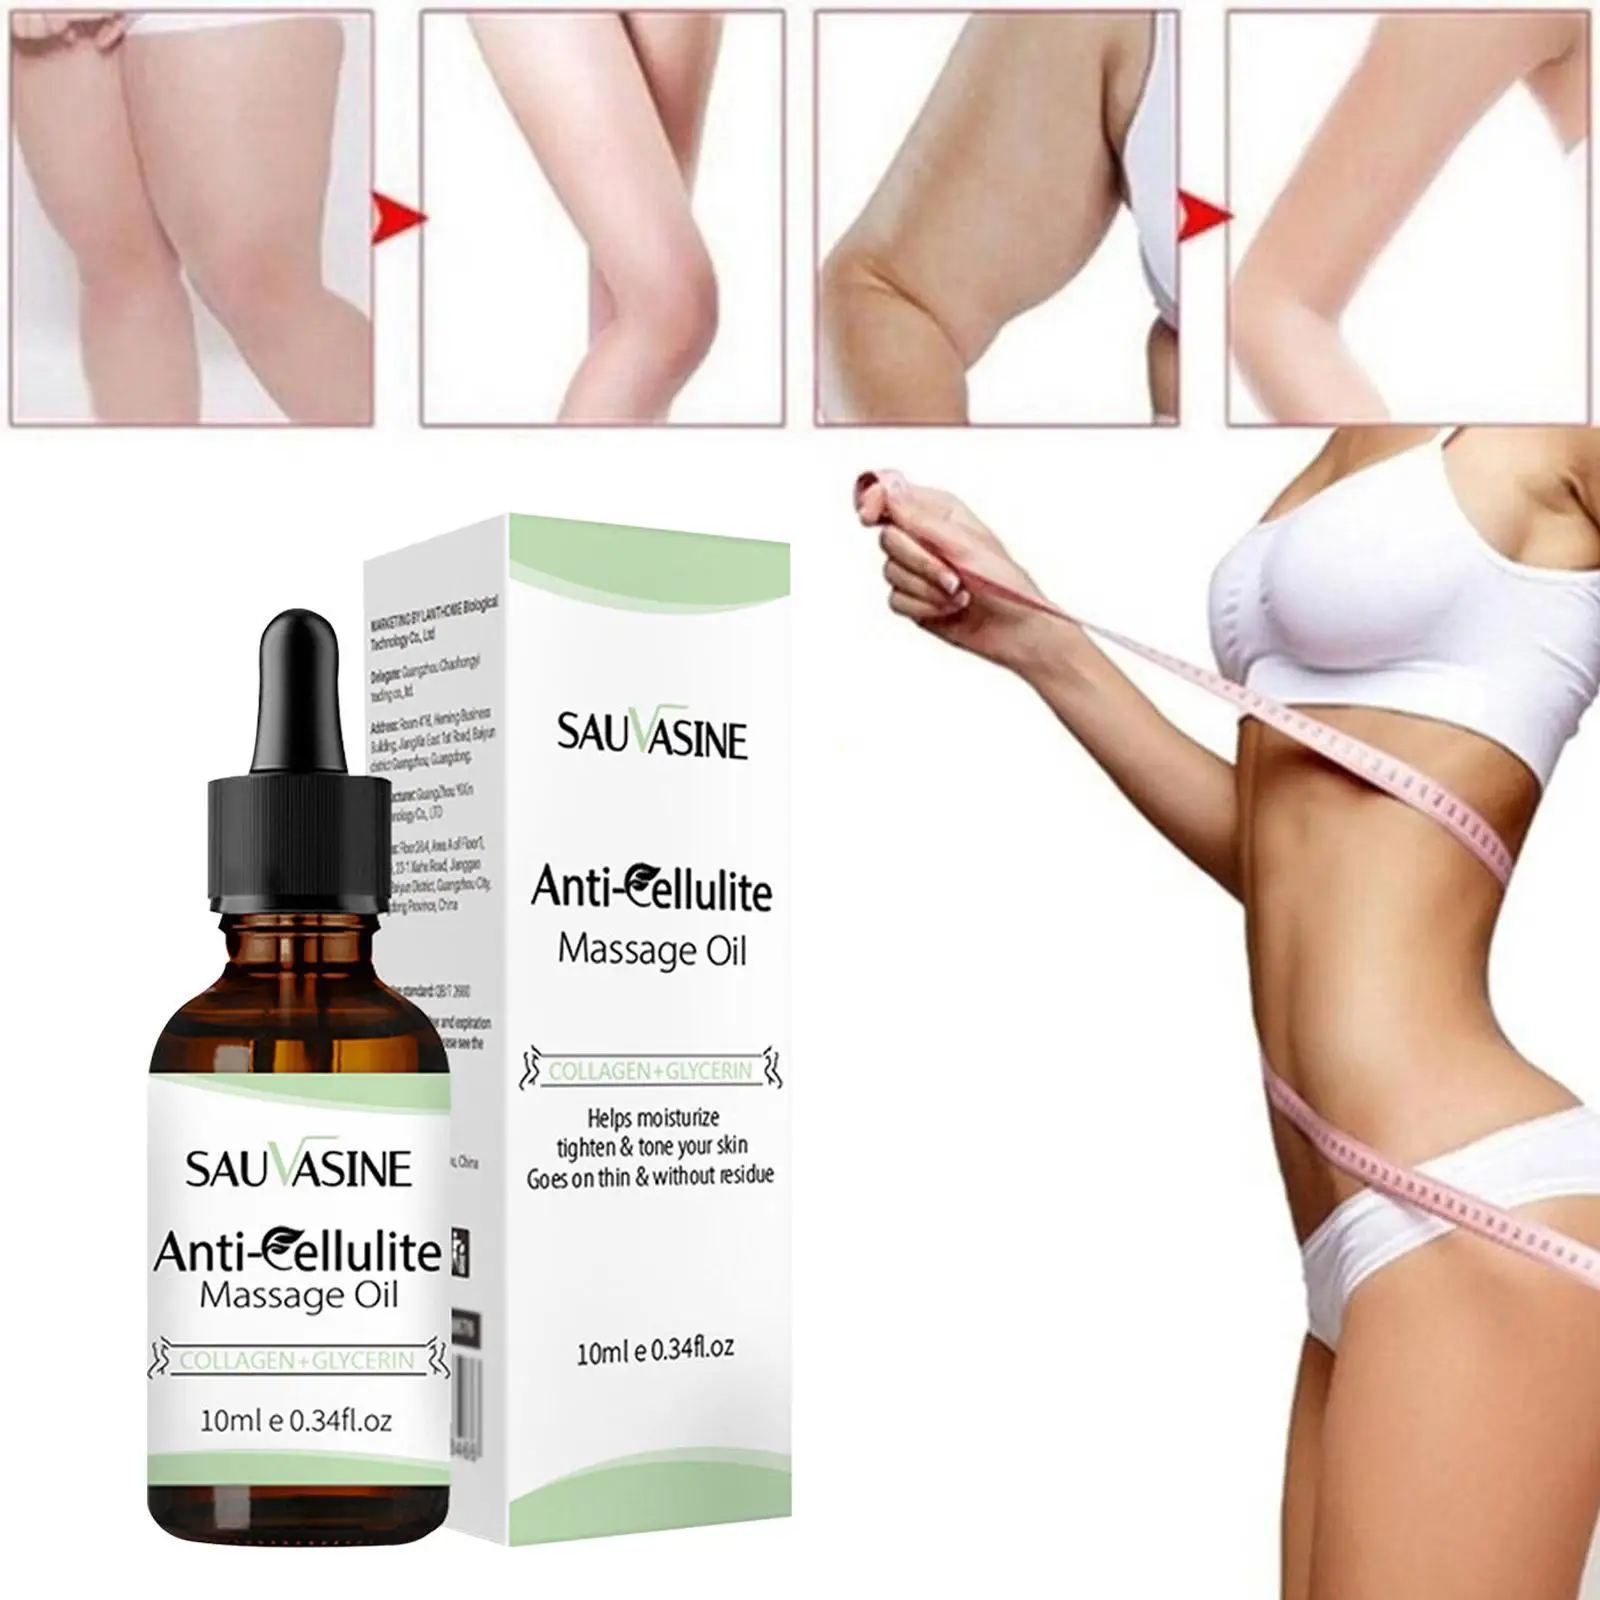 

Weight Loss Dissolve Fat Slimming Essential Oils For Whole Body Anti Cellulite Belly Losing Weight Fat Burning Skin Firming Body